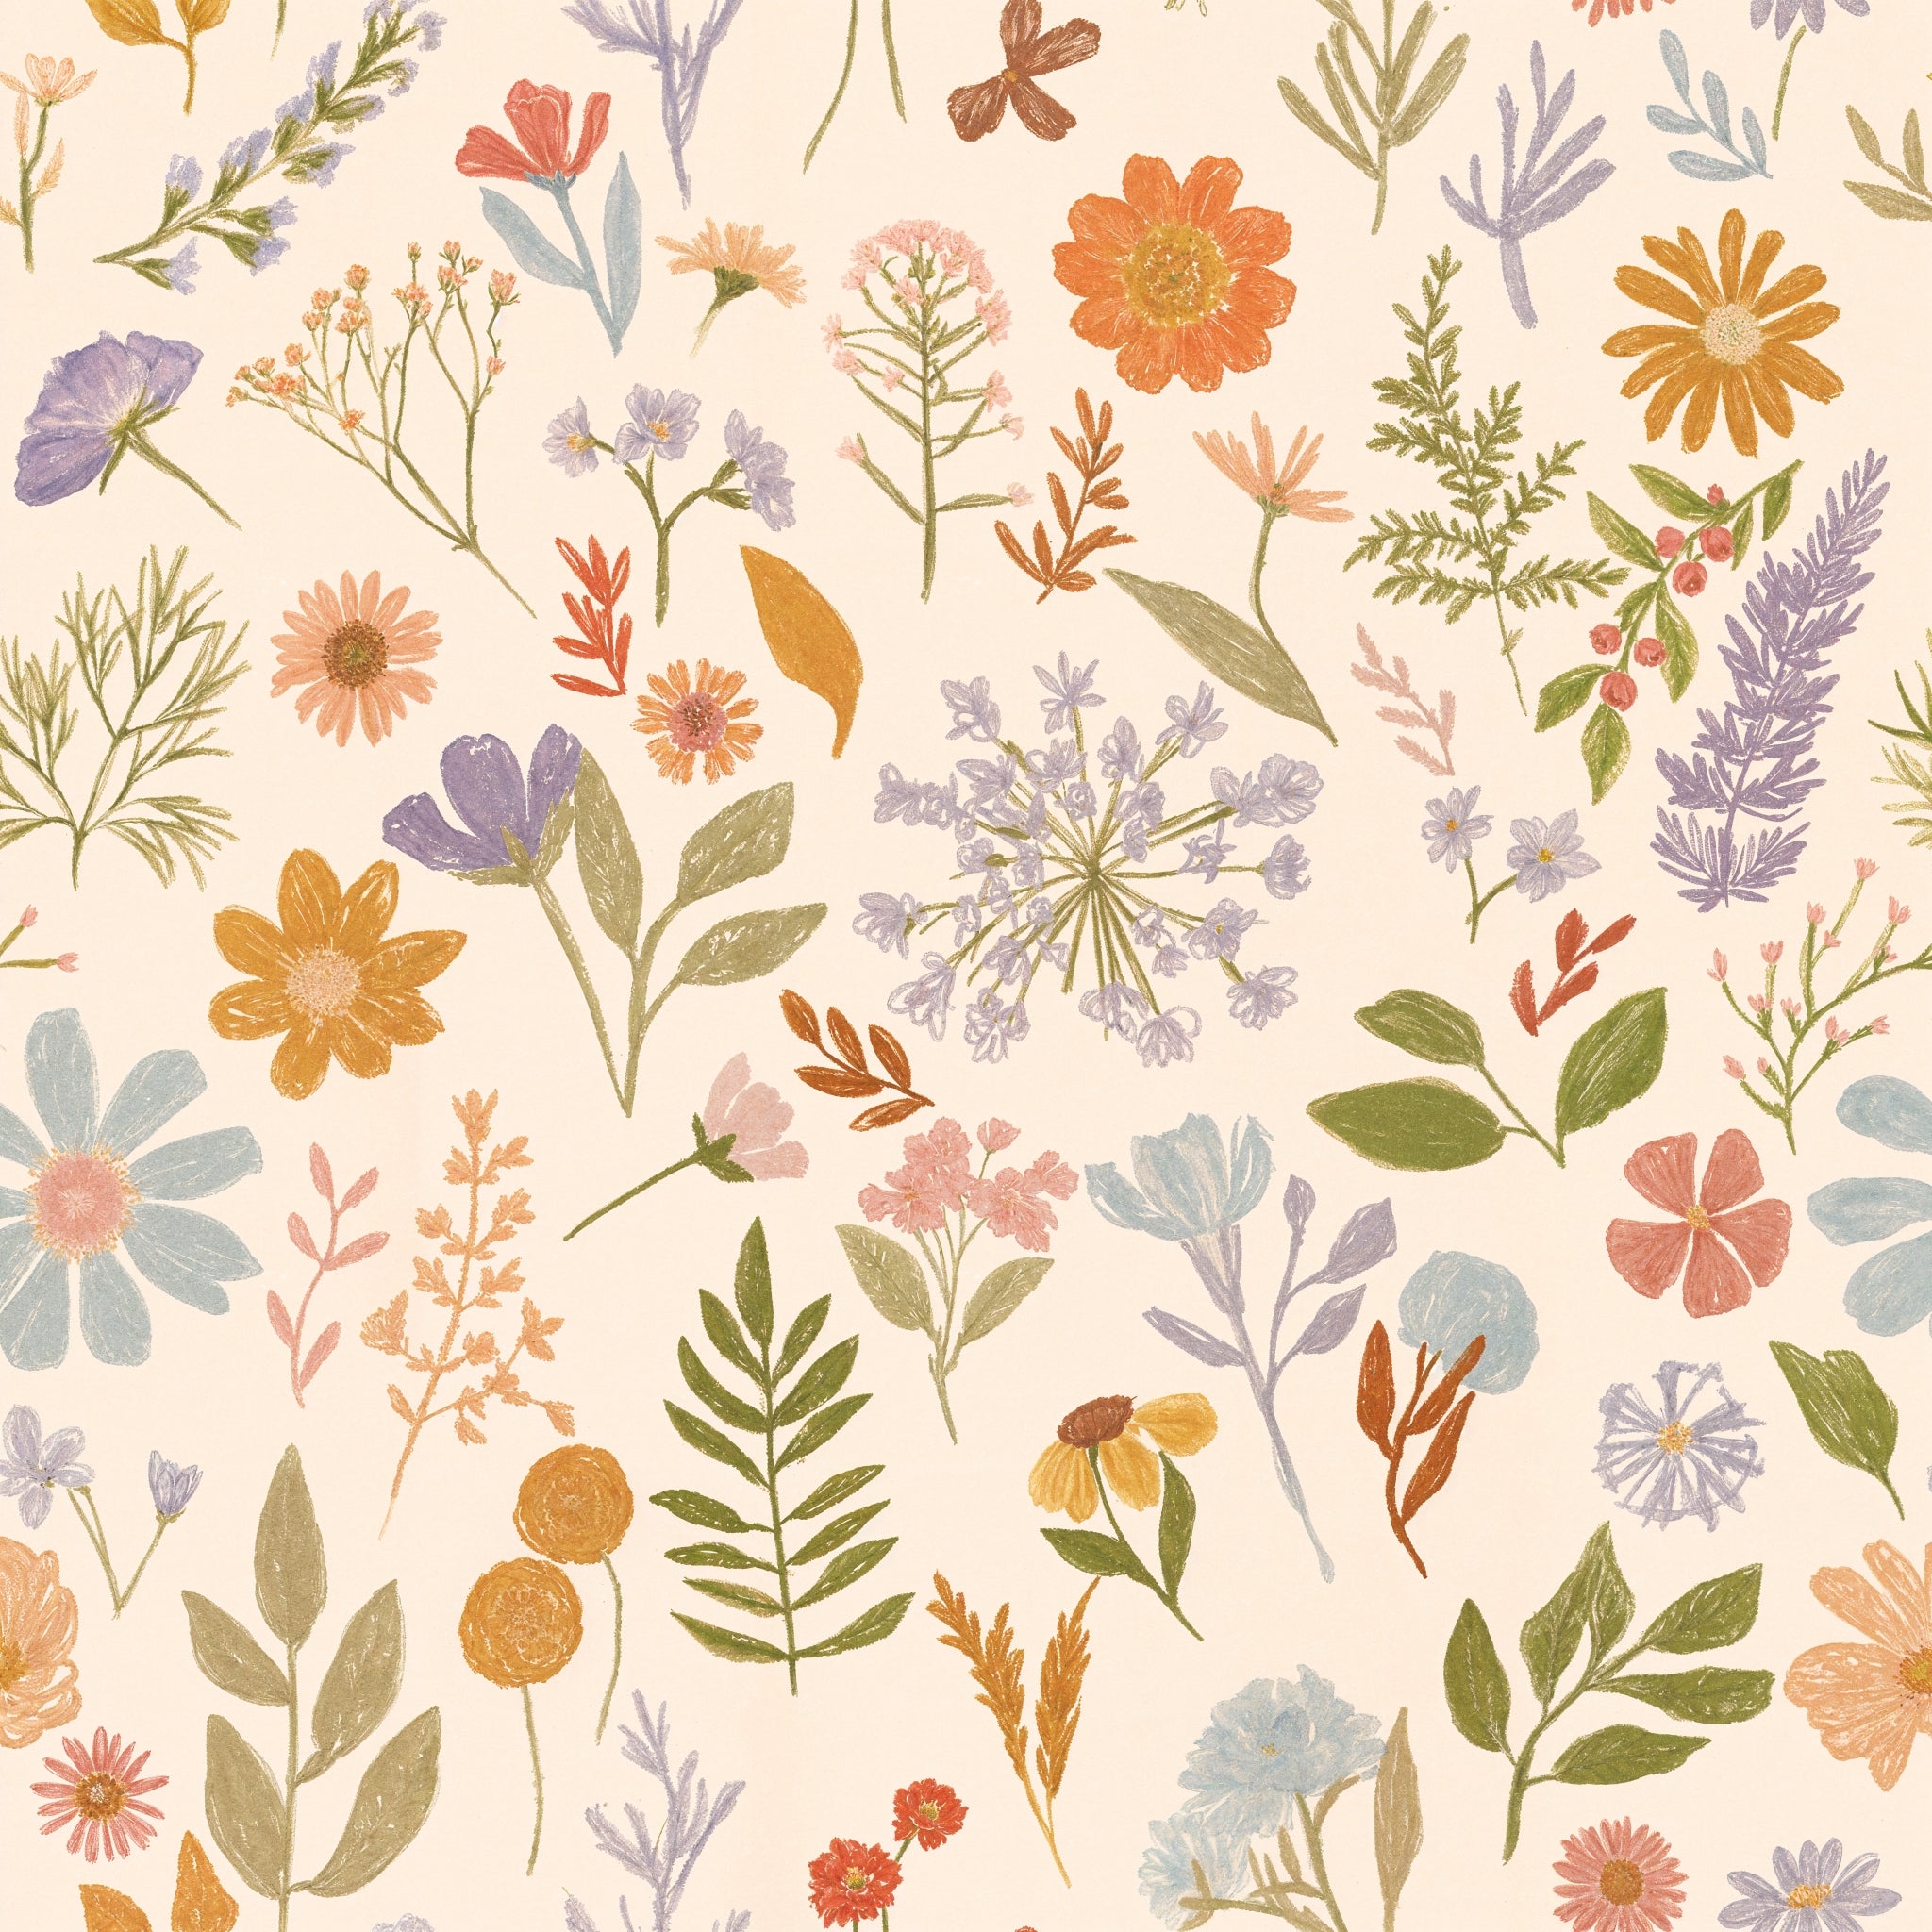 "Lily's Field Wallpaper by Wall Blush enhancing a cozy bedroom ambiance with its floral design."